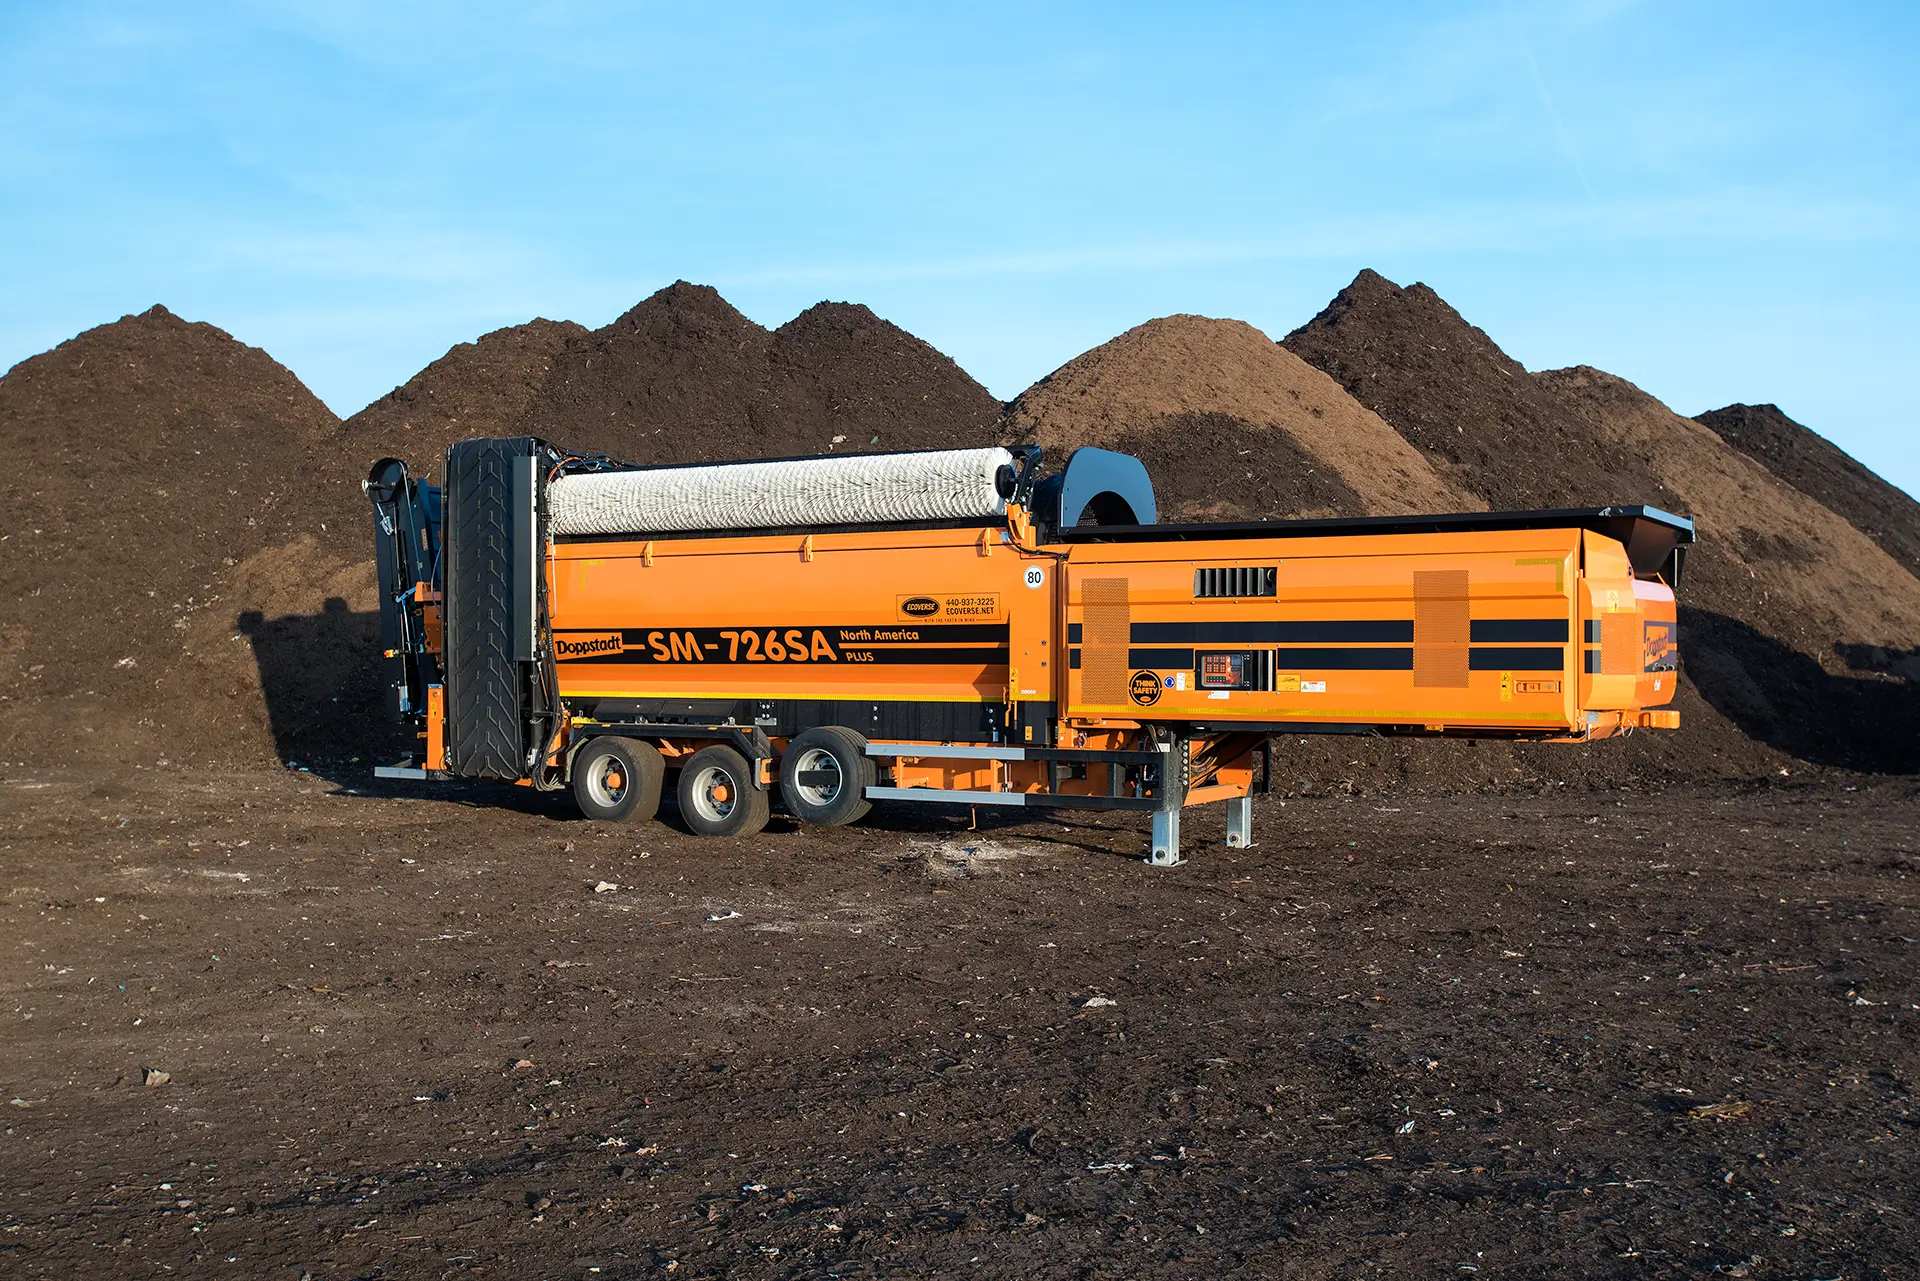 A Doppstadt SM 726 trommel screen sits in a compost facility with its conveyors retracted.